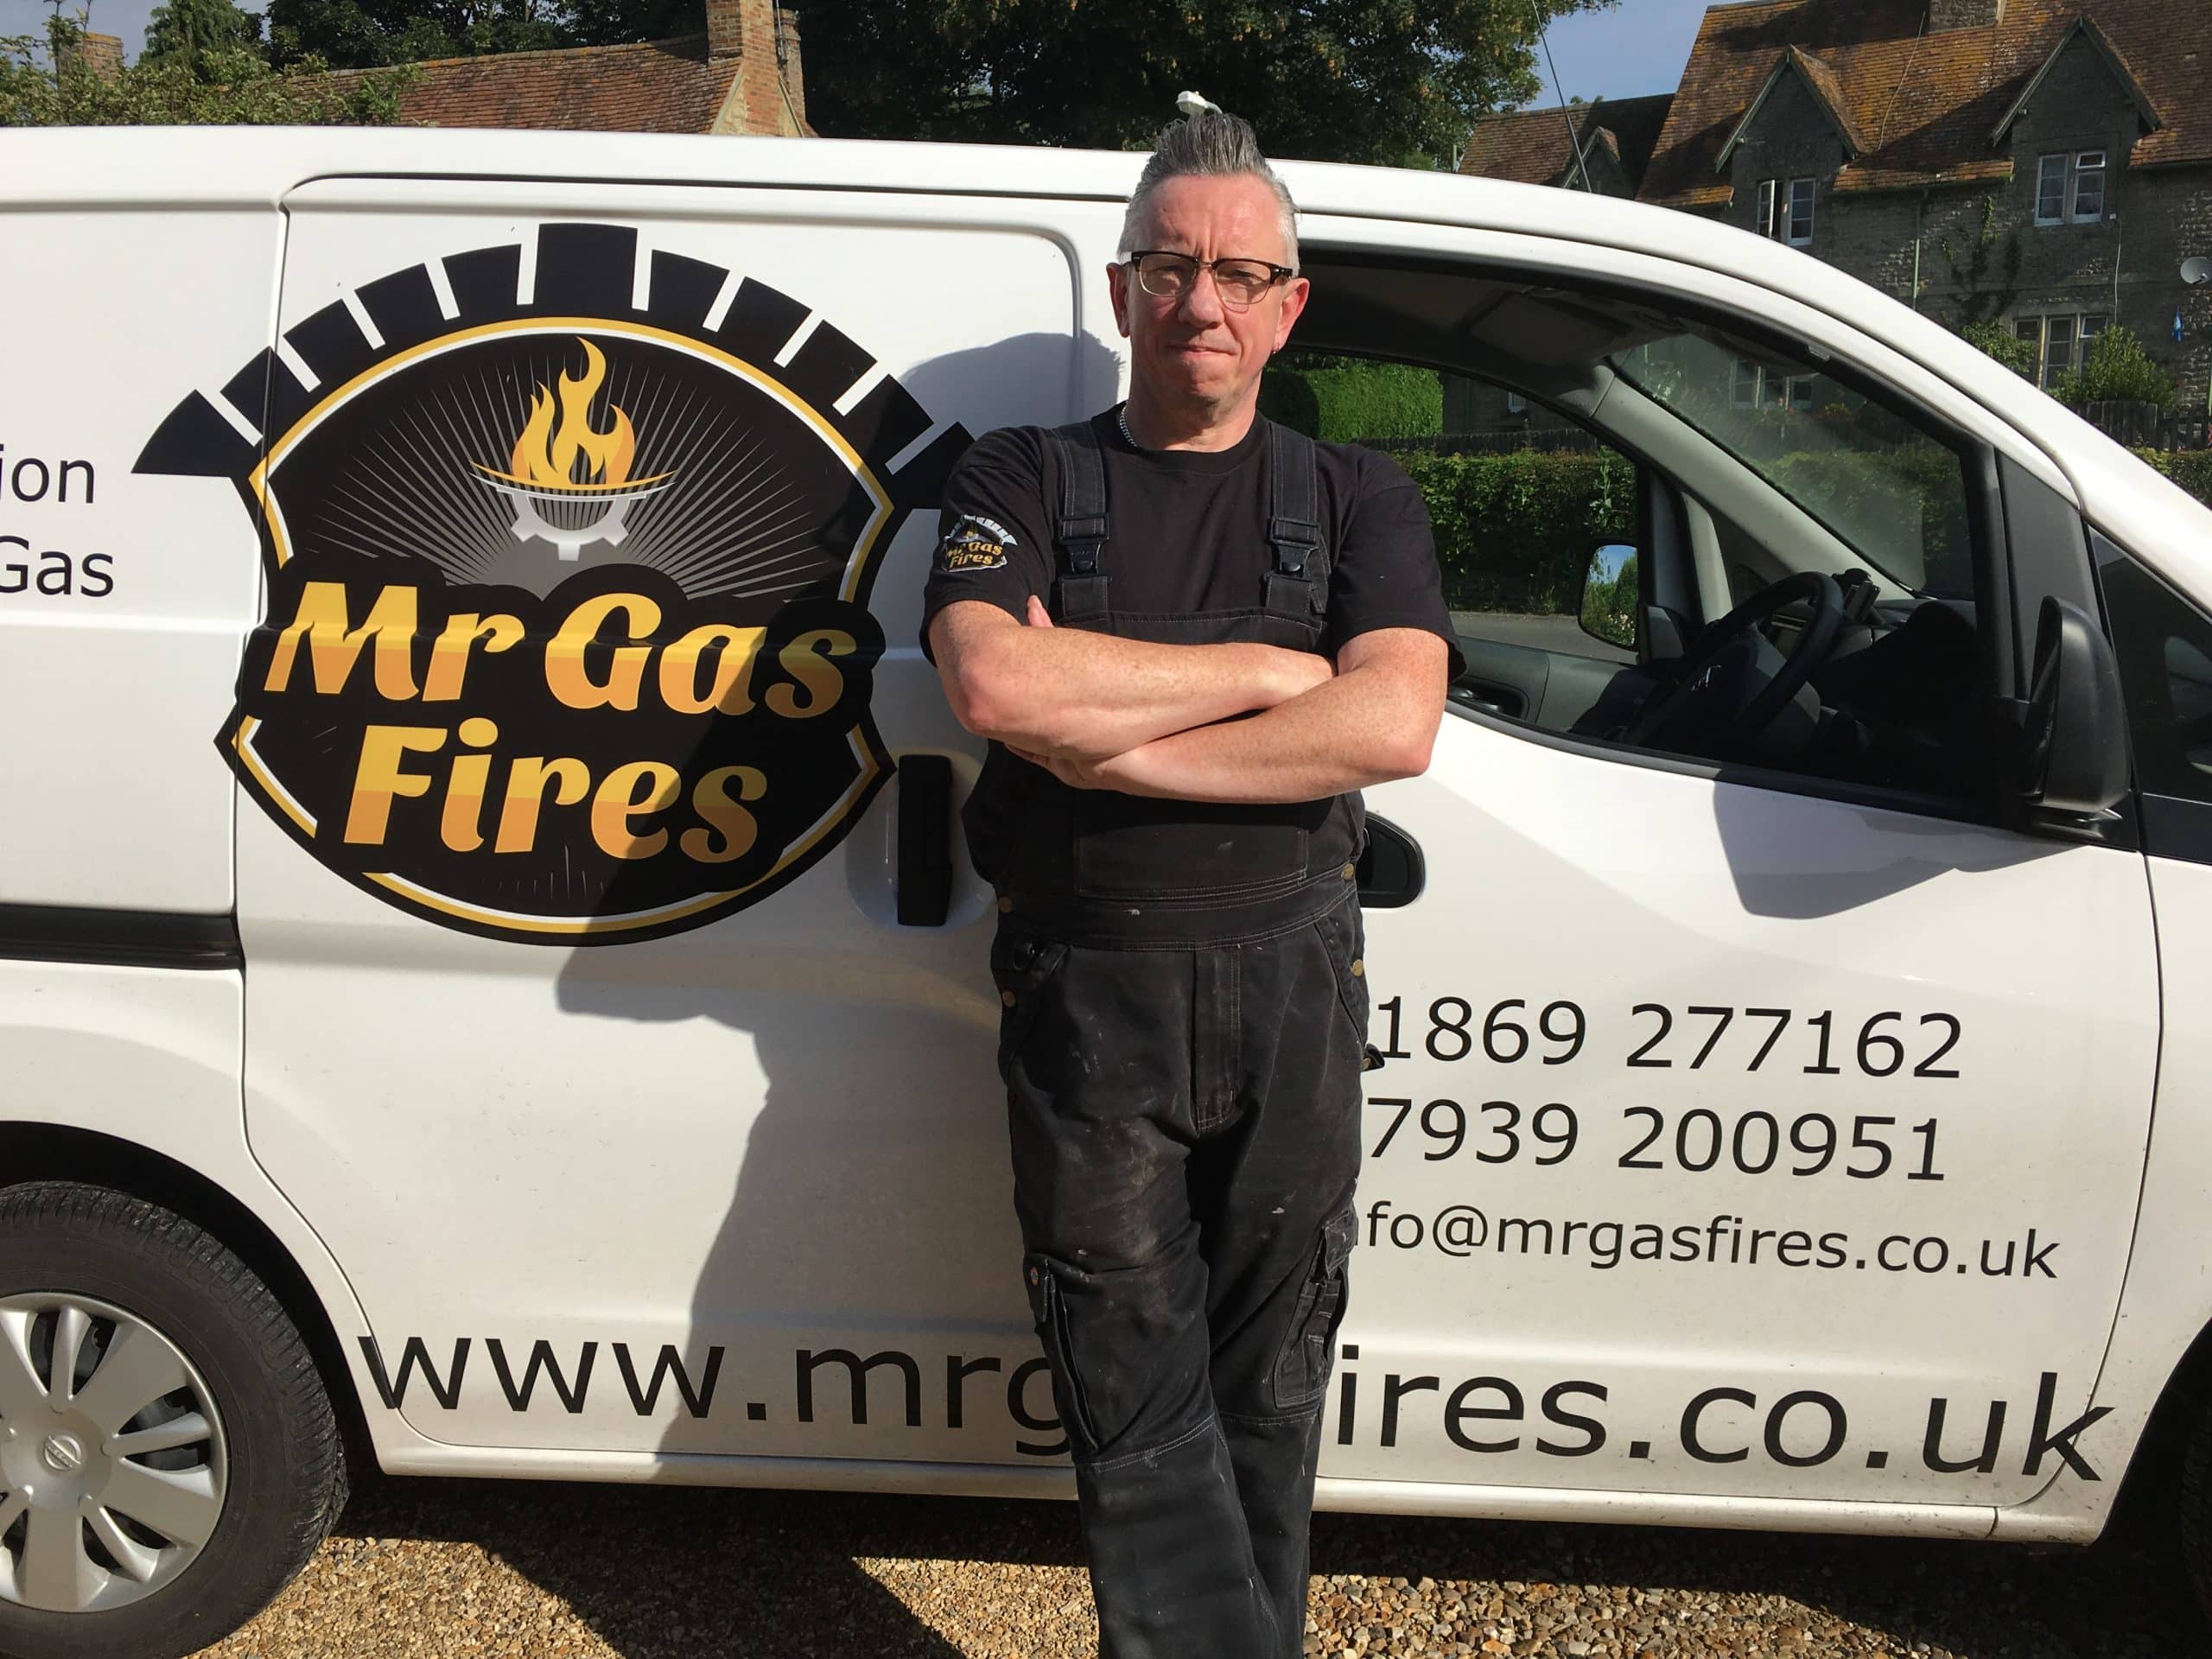 Man with arms crossed leaning against van that reads 'Mr Gas Fires'.